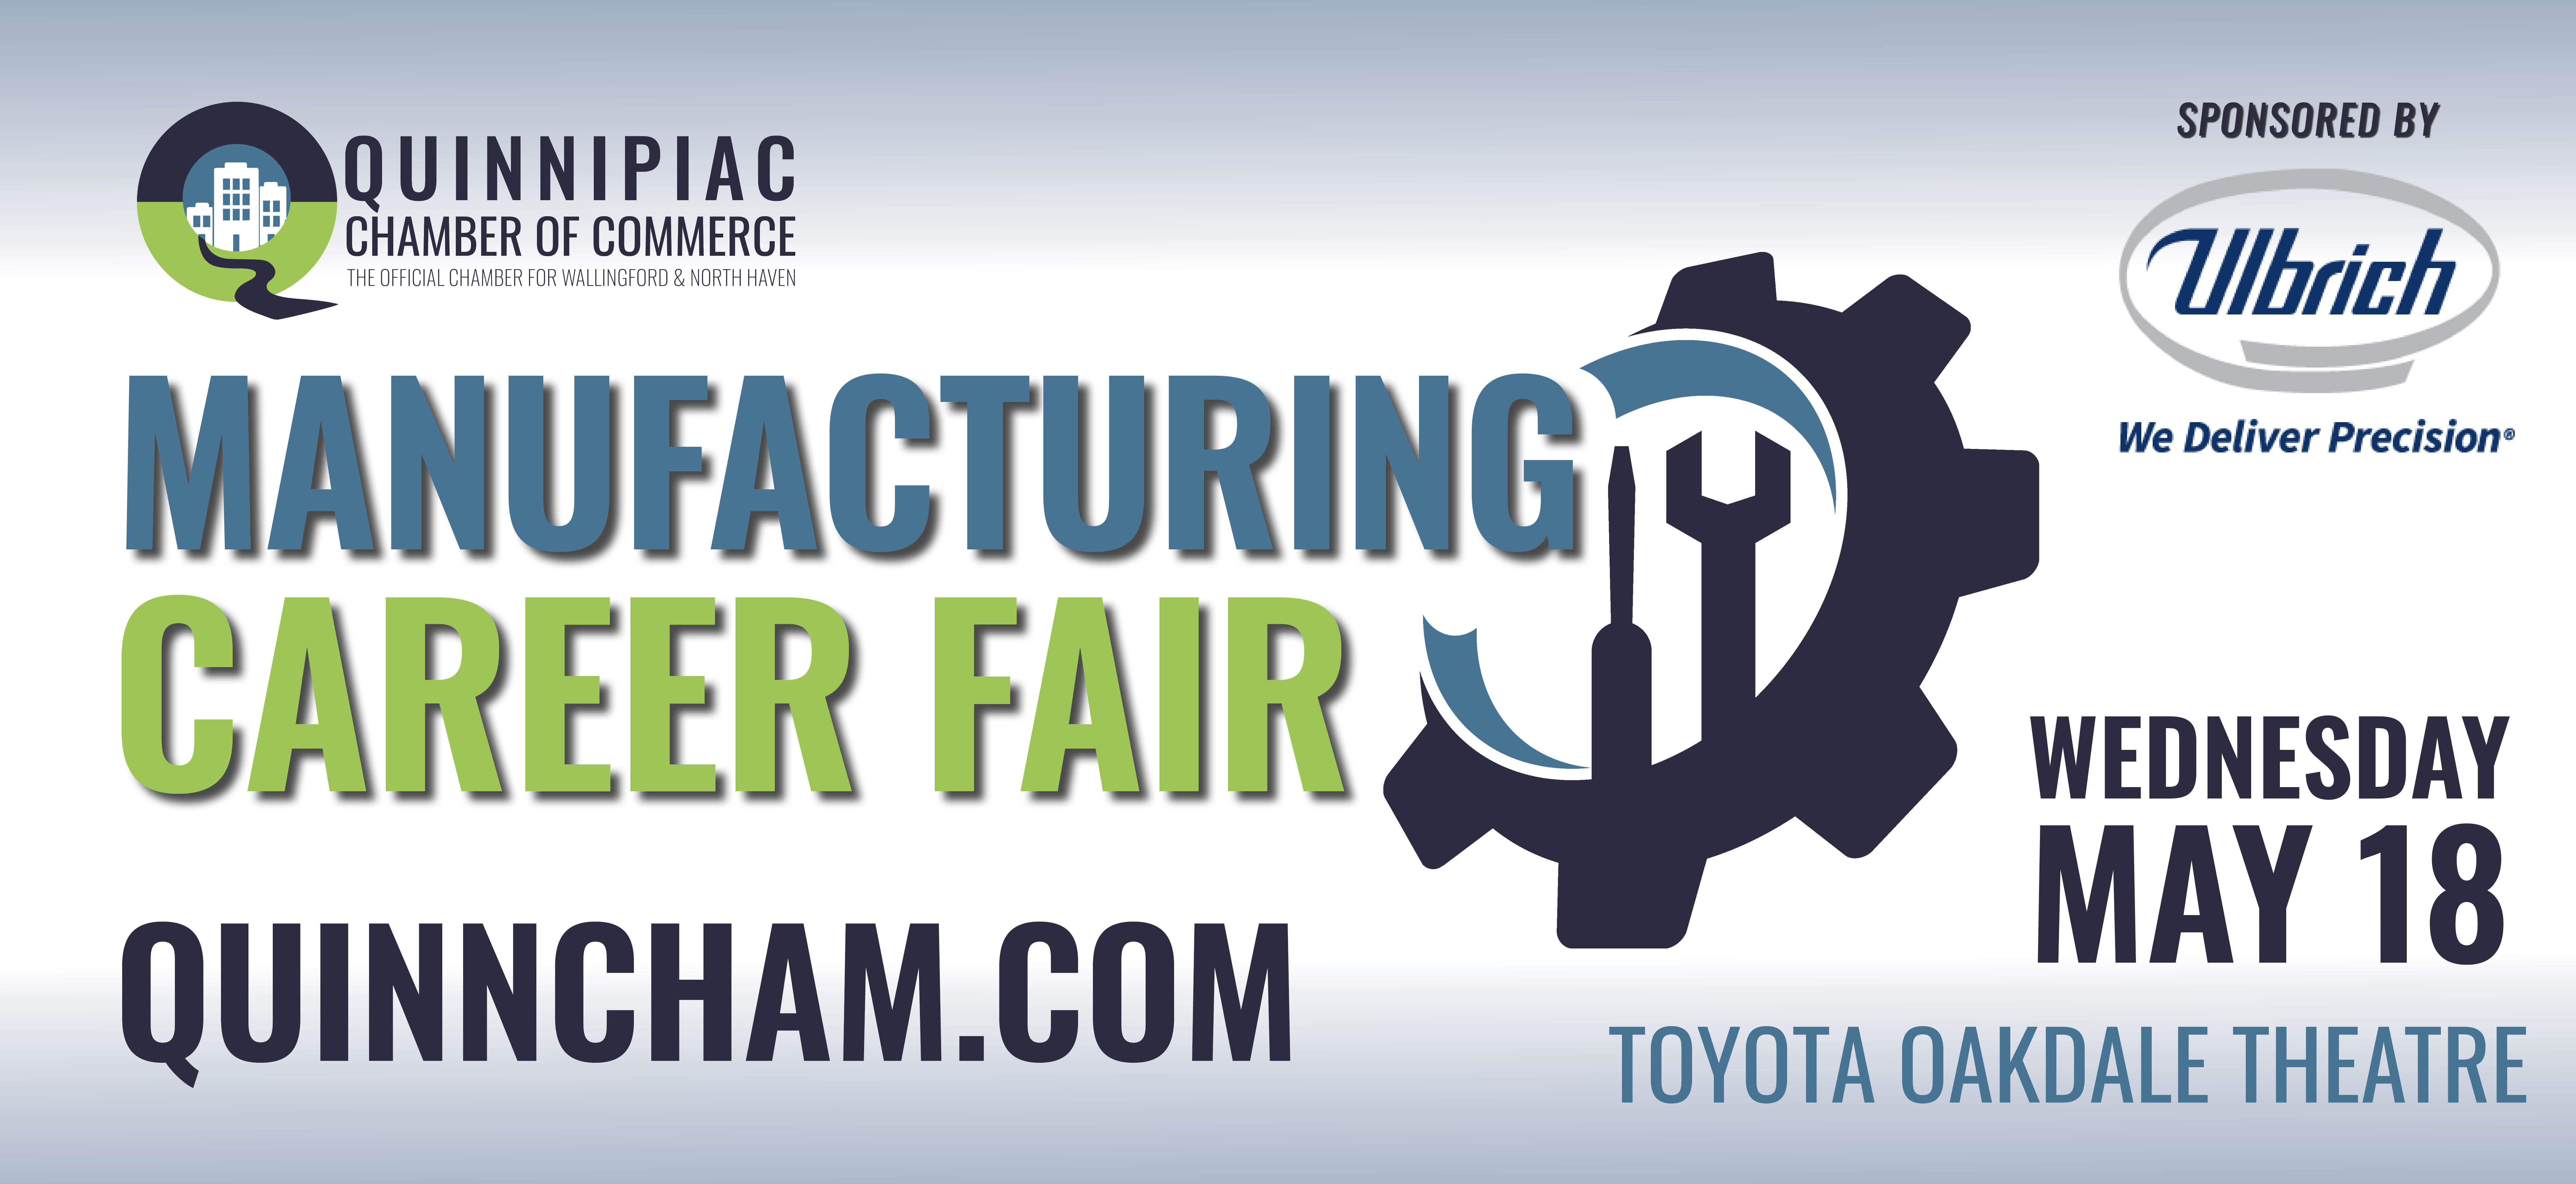 Quinnipiac Chamber of Commerce to Hold 4th Annual Manufacturing Career Fair: Connecting Regional Talent to Manufacturing Jobs